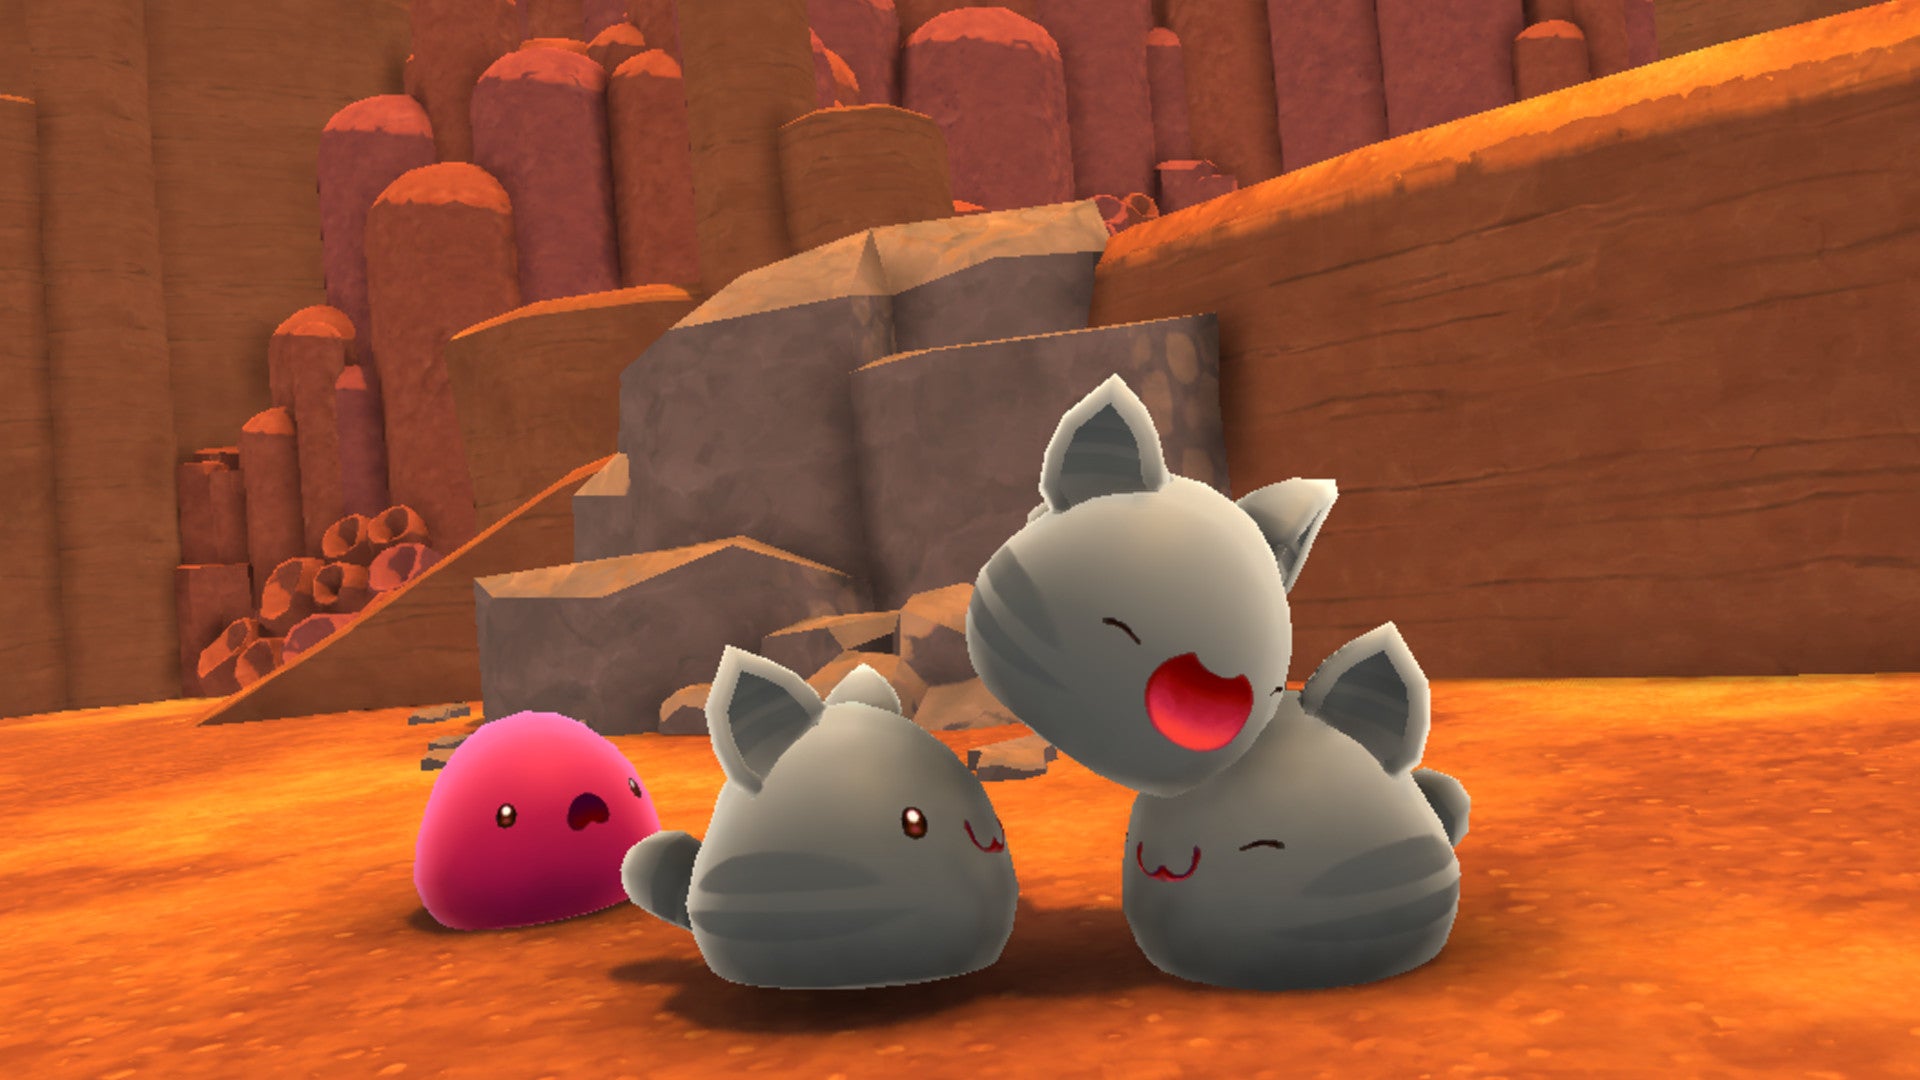 slime rancher 2 all slimes download